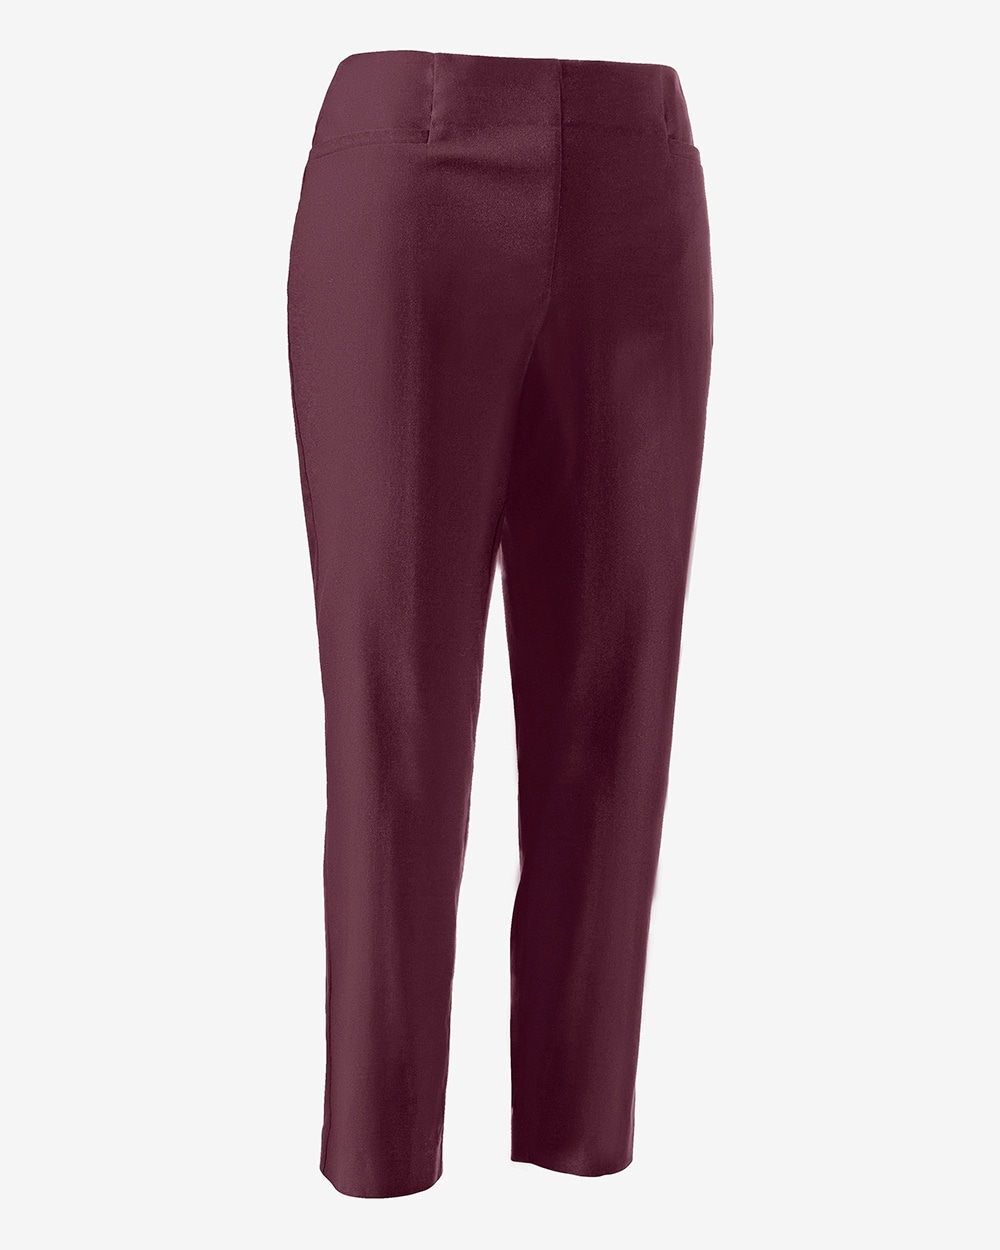 Perfect Stretch Marveluxe Slim-Leg Ankle Pants